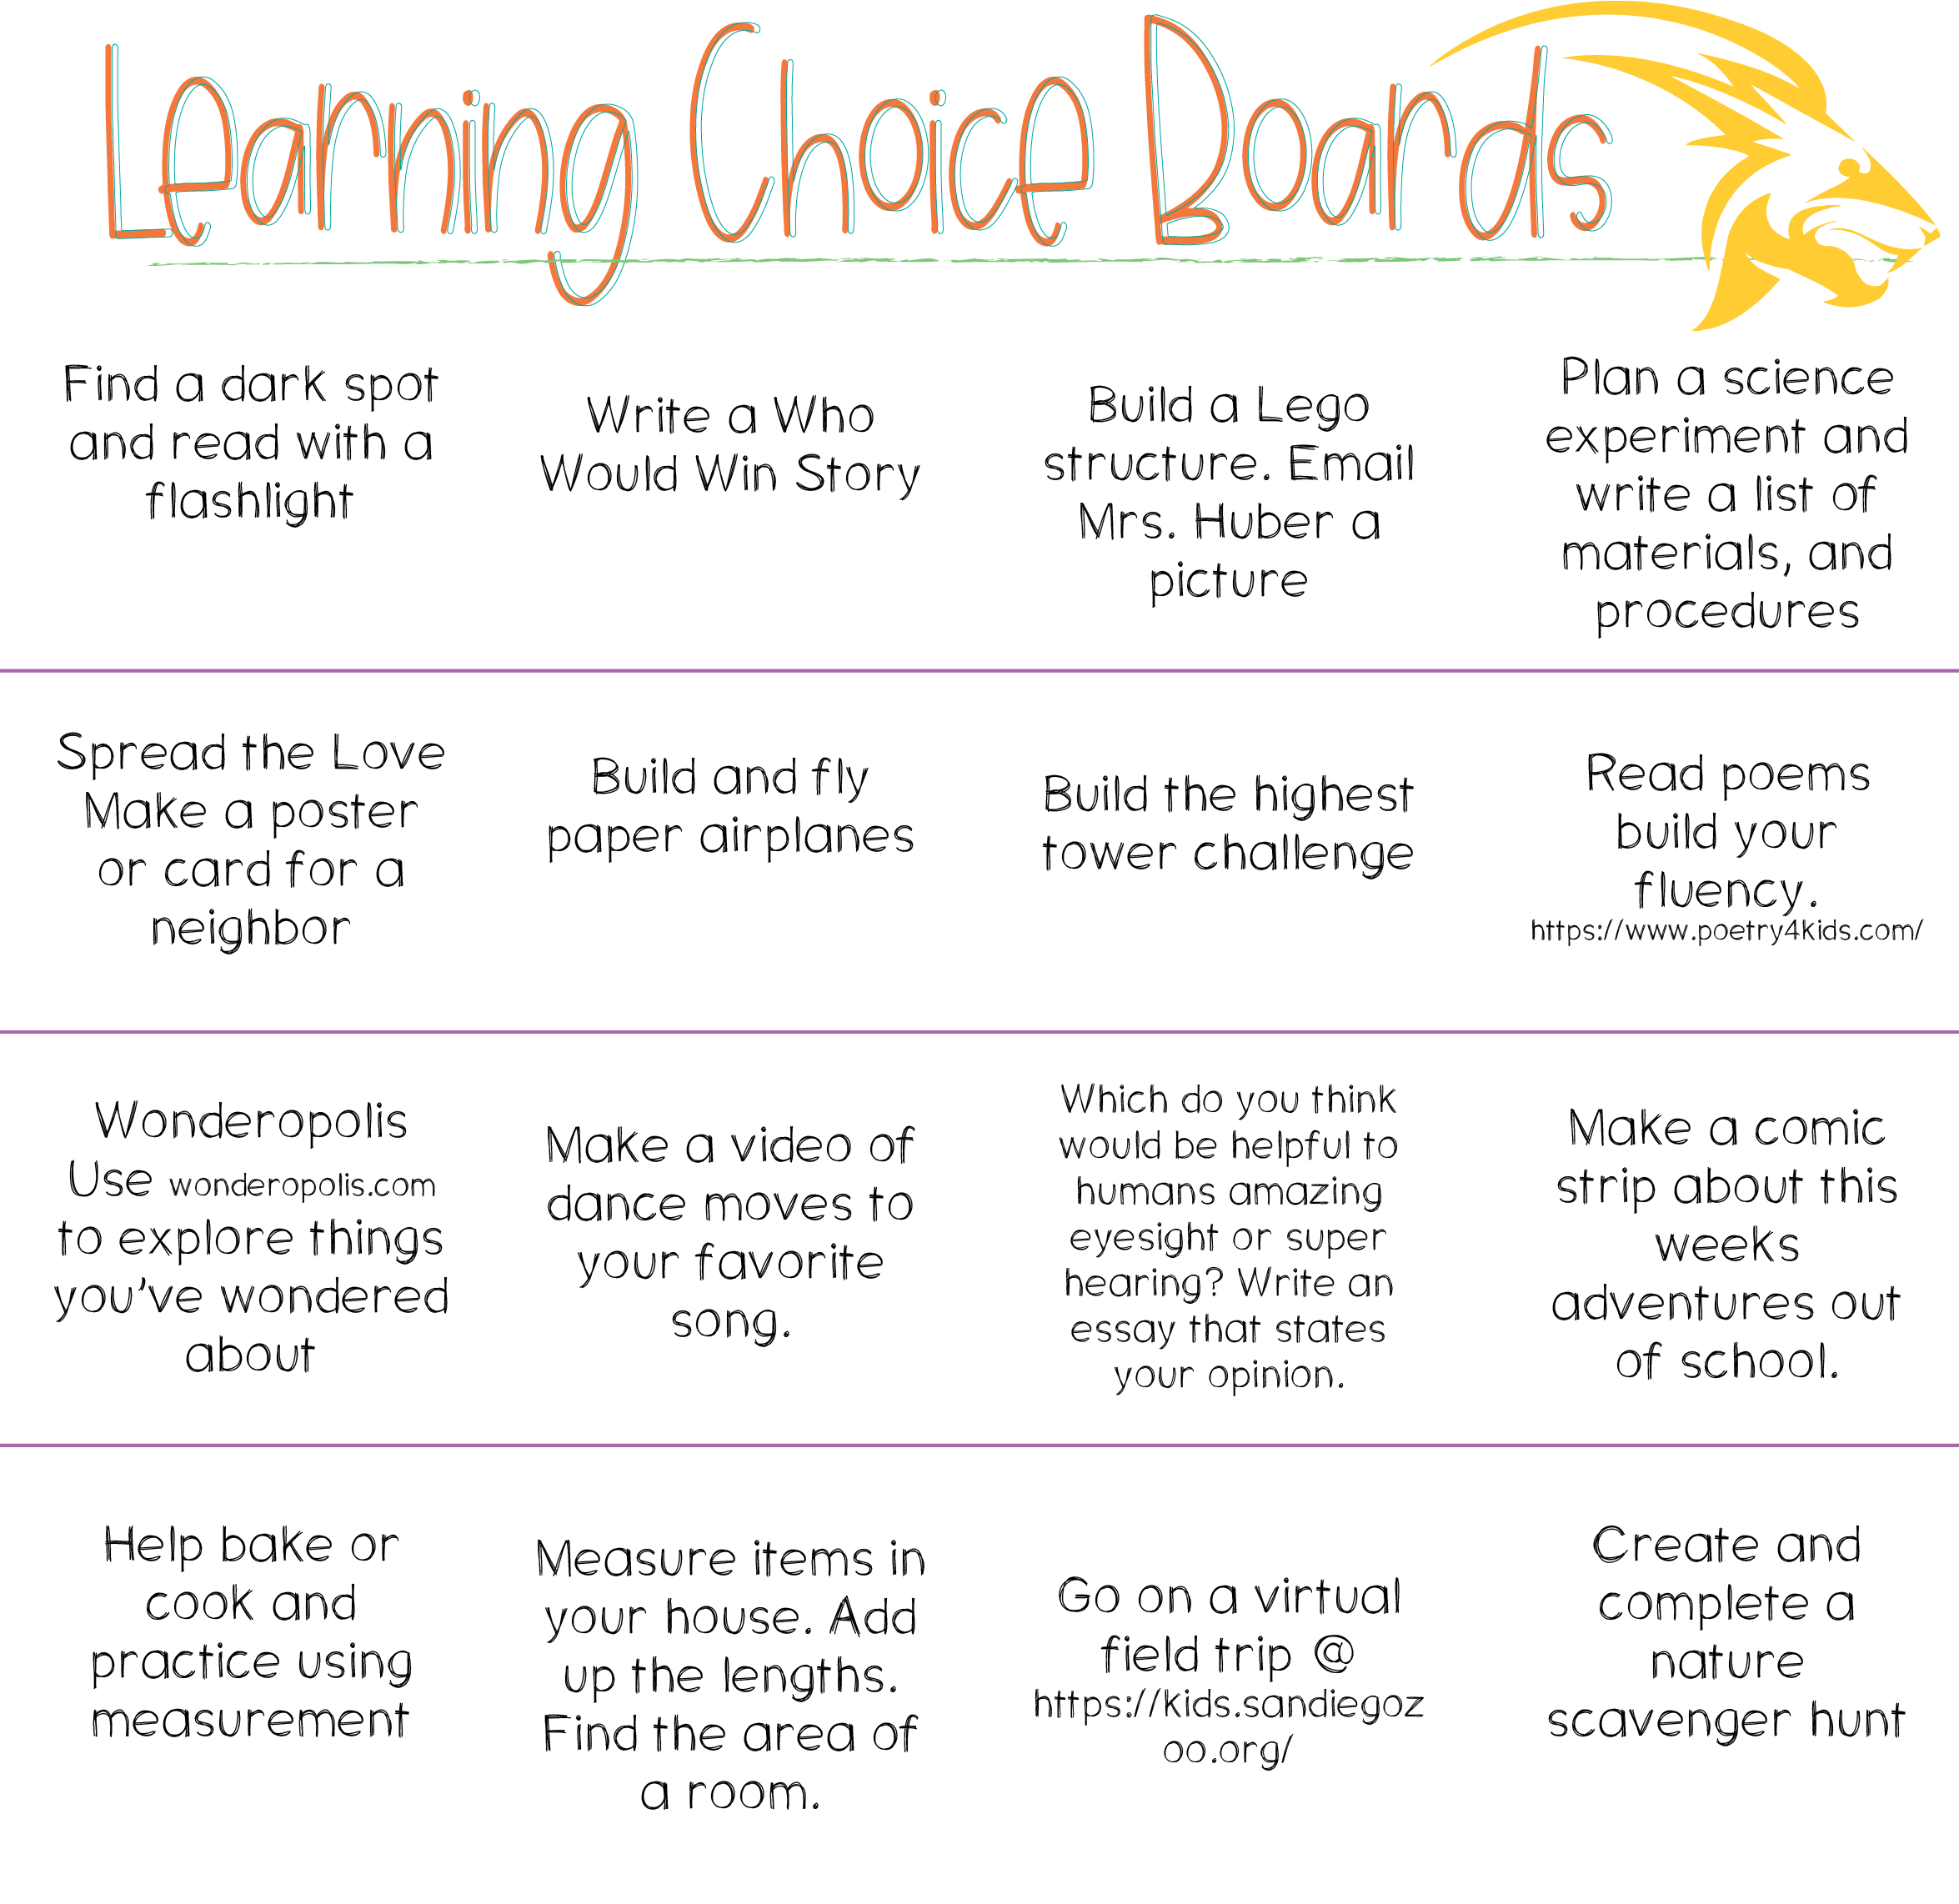 LEARNING CHOICE BOARDS